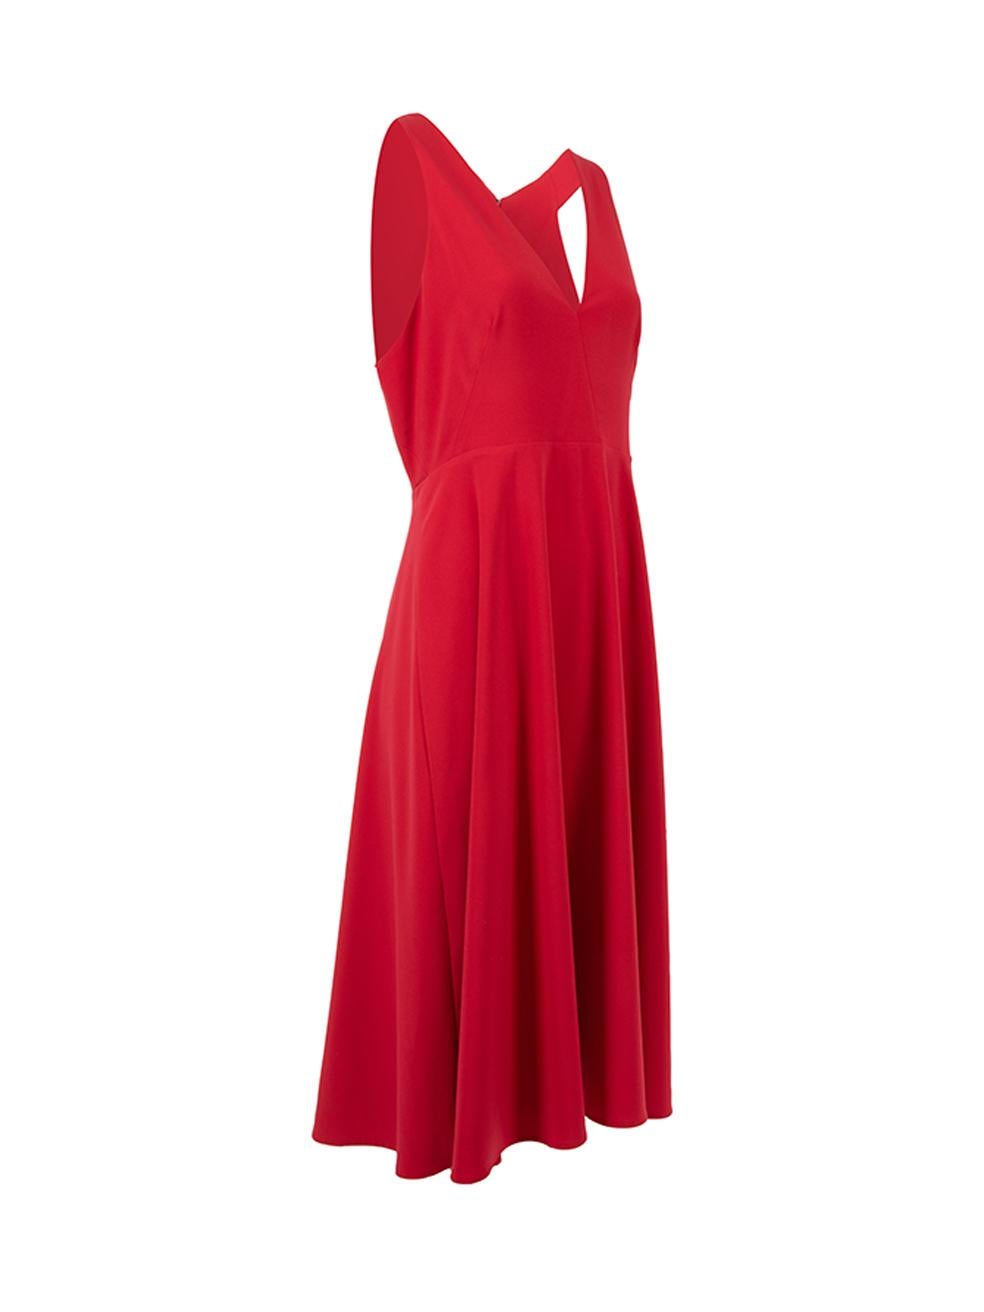 CONDITION is Very good. Minimal wear to dress is evident. Minimal wear to zipper which is scuffed and part of the material has peeled off. There is also slight pilling to the back of the neckline on this used Halston Heritage designer resale item. 
